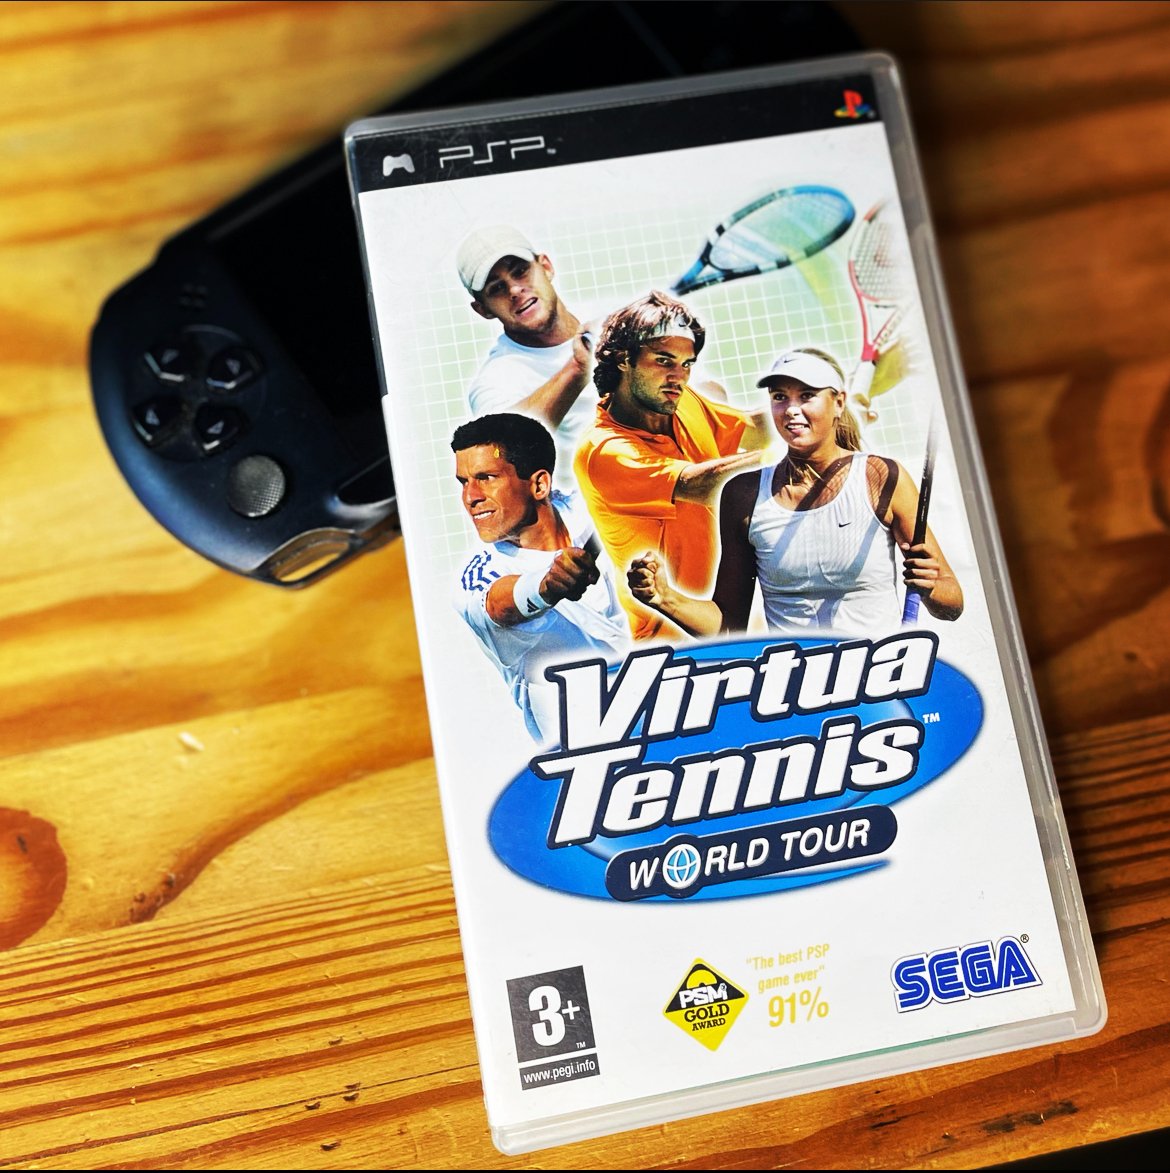 The PSP version of yet another fantastic tennis game!
#GamersUnite #ShareYourGames #PSPWednesDay #RETROGAMING